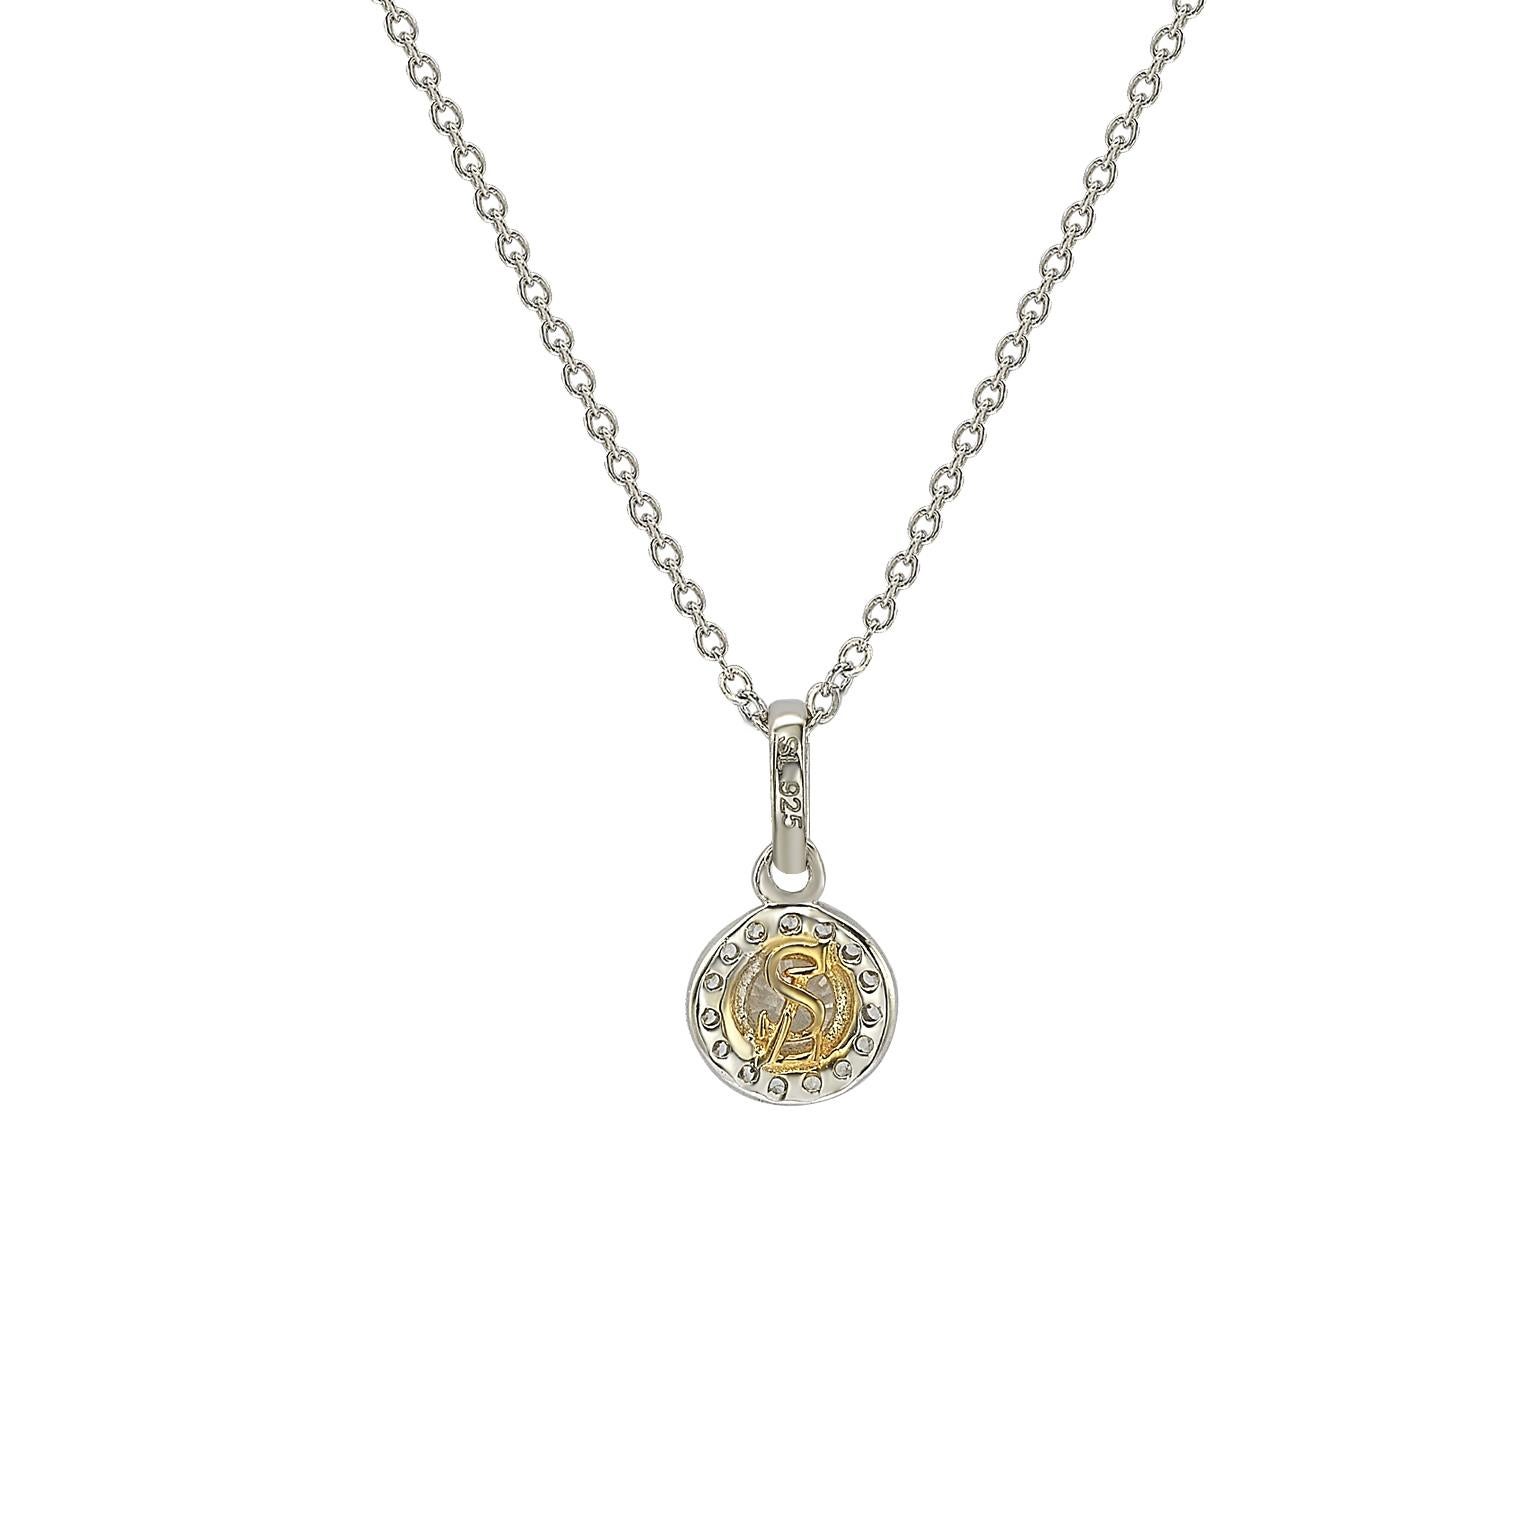 This elegant Suzy Levian diamond halo pendant displays round-cut diamonds on 14 karat white gold setting. This gorgeous pendant contains 20 white round cut diamonds totaling .35 cttw. The larger center stone is 4 mm in size and has a halo of 1 mm